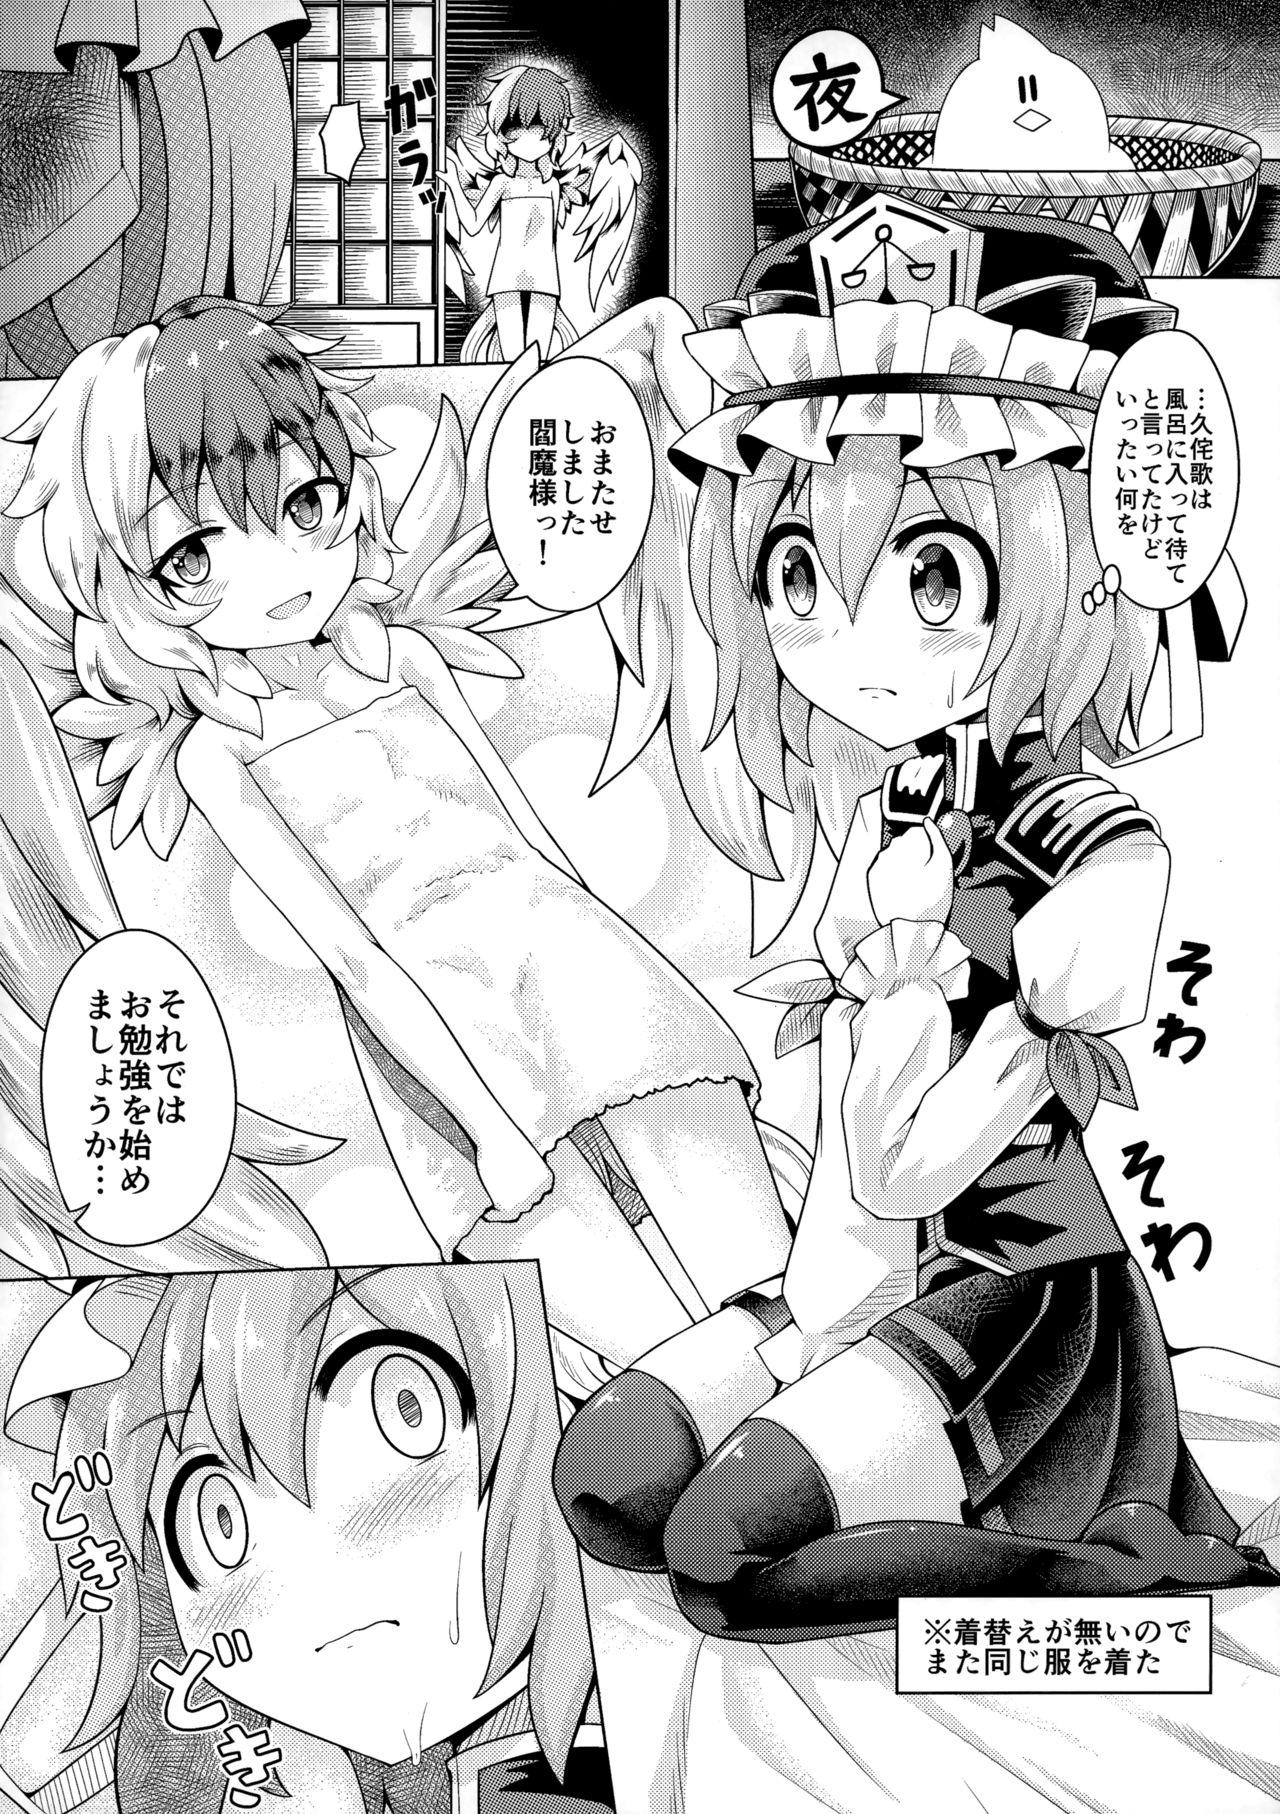 Moneytalks Reverse Sexuality 9 - Touhou project Pinoy - Page 5